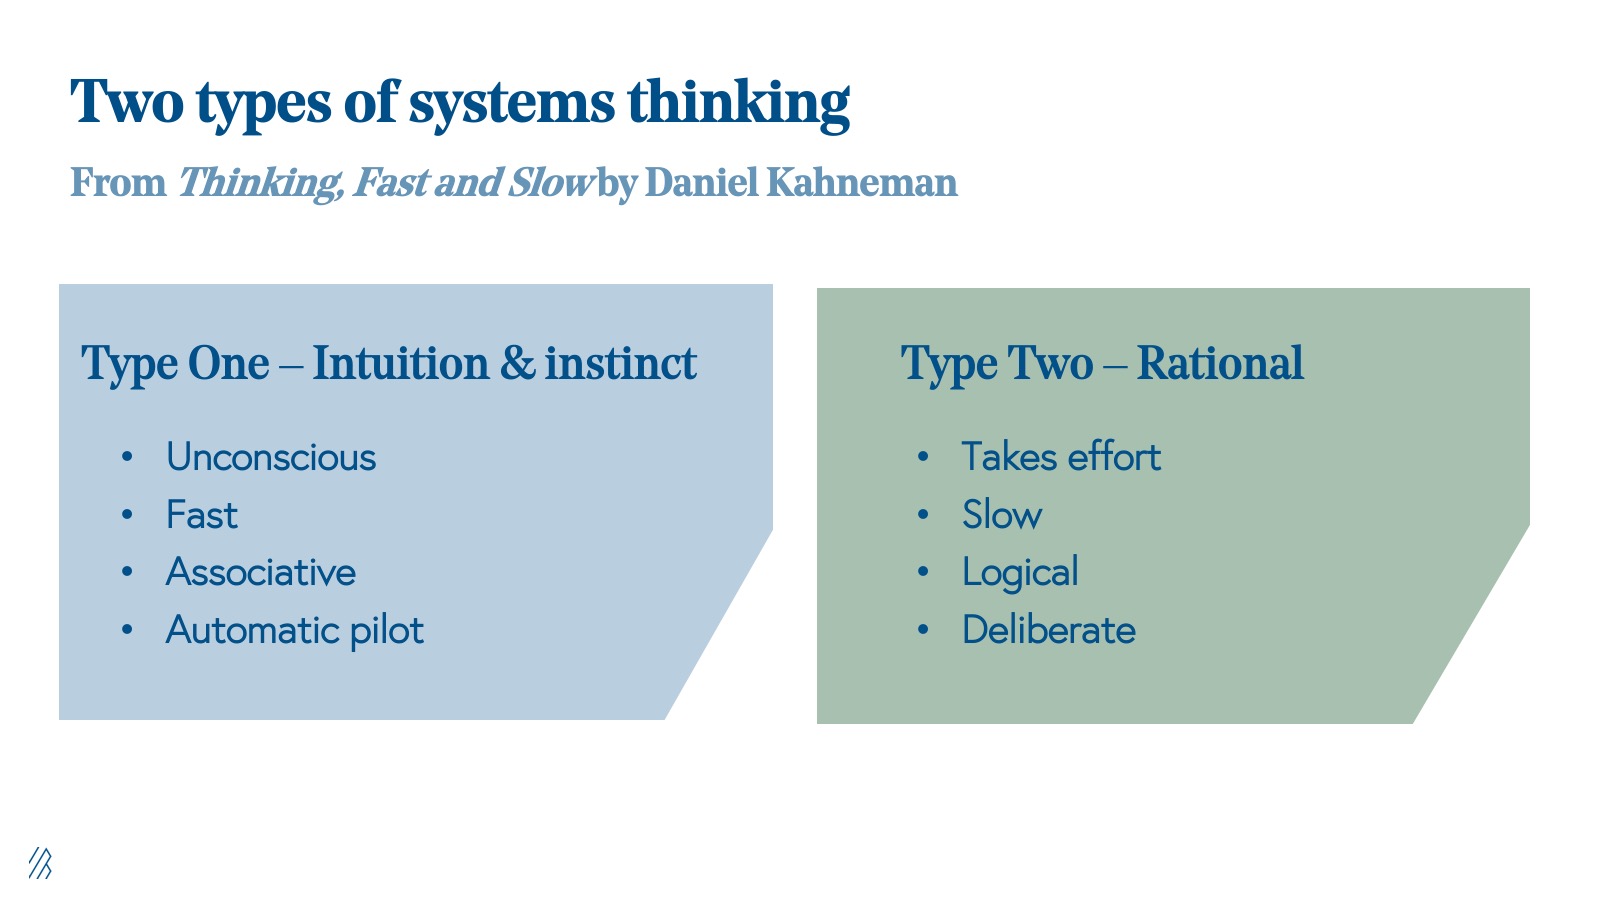 Two types of systems thinking